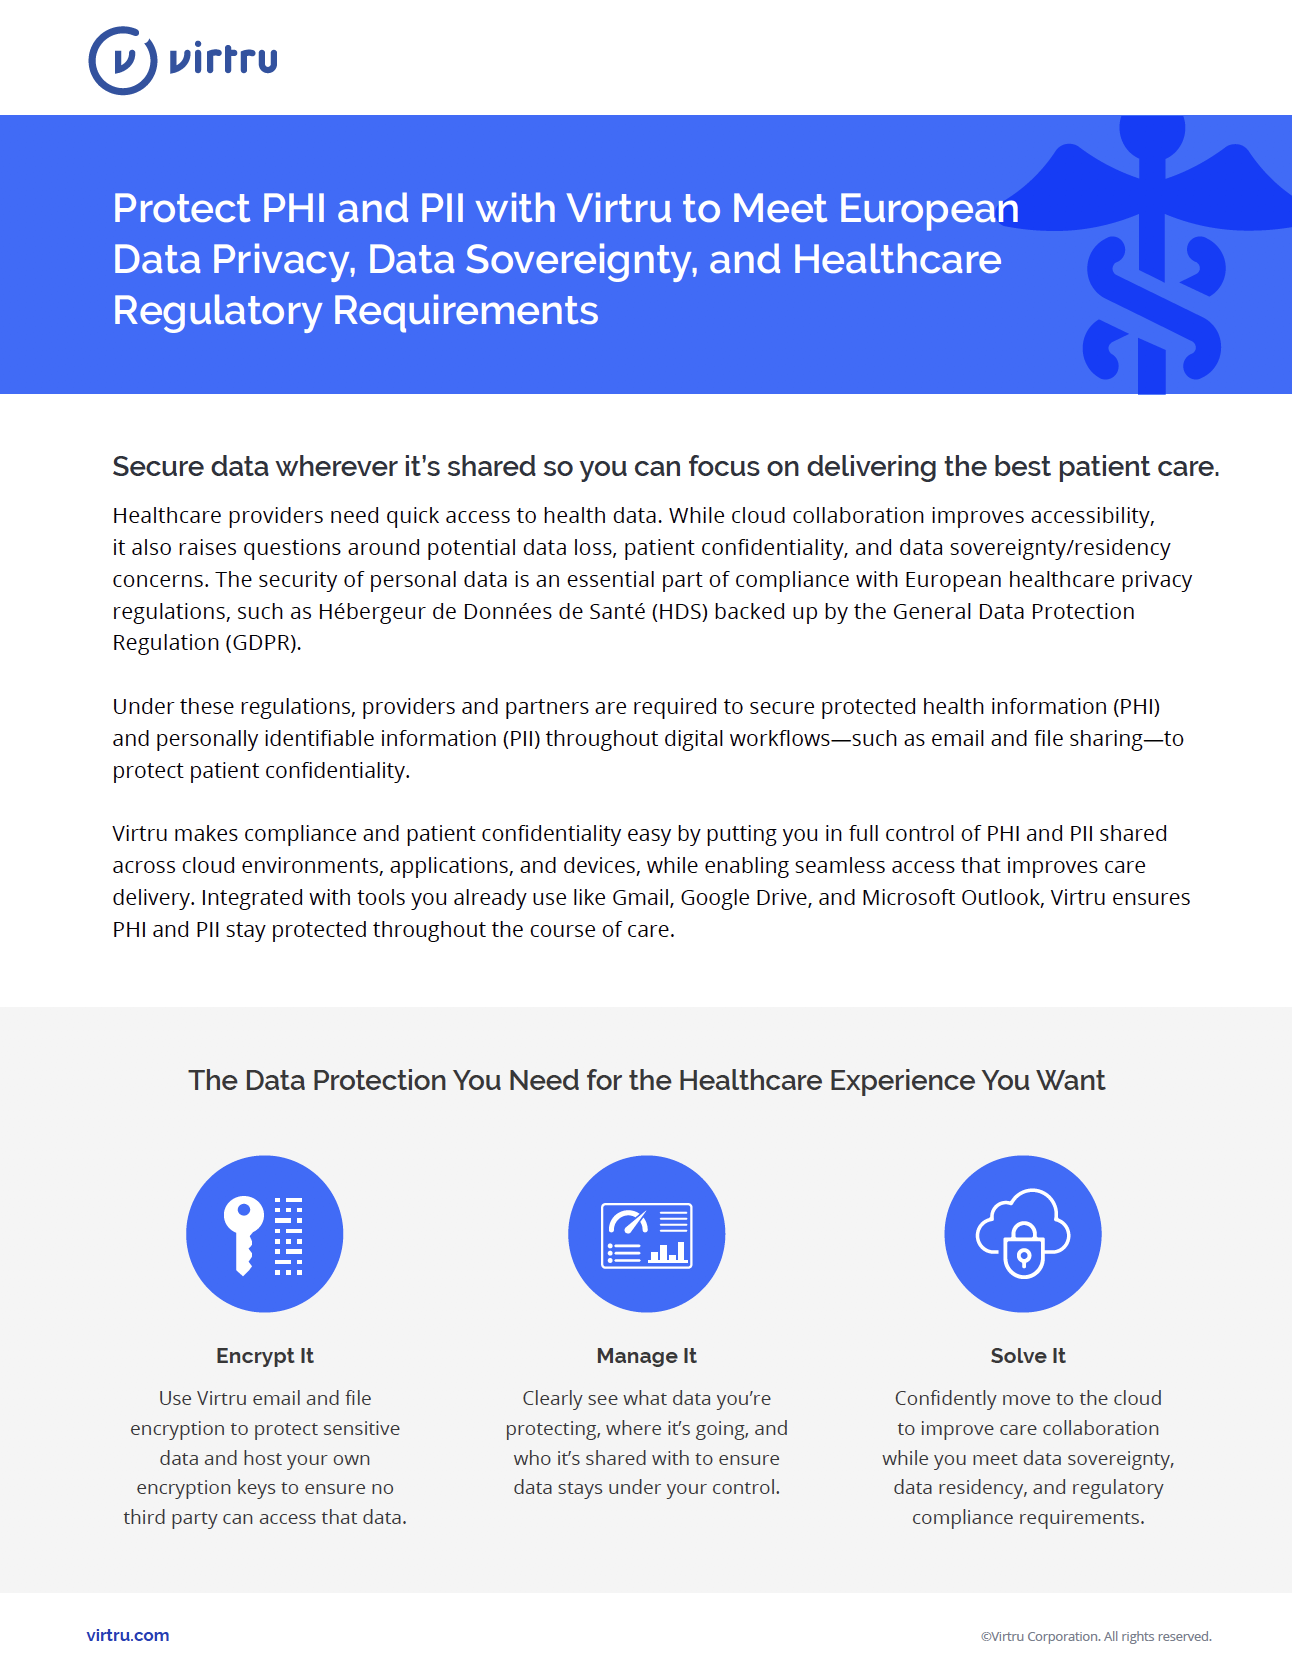 Ensuring-Compliance-with-European-Data-Privacy-and-Healthcare-Regulations-Using-Virtru-screenshot